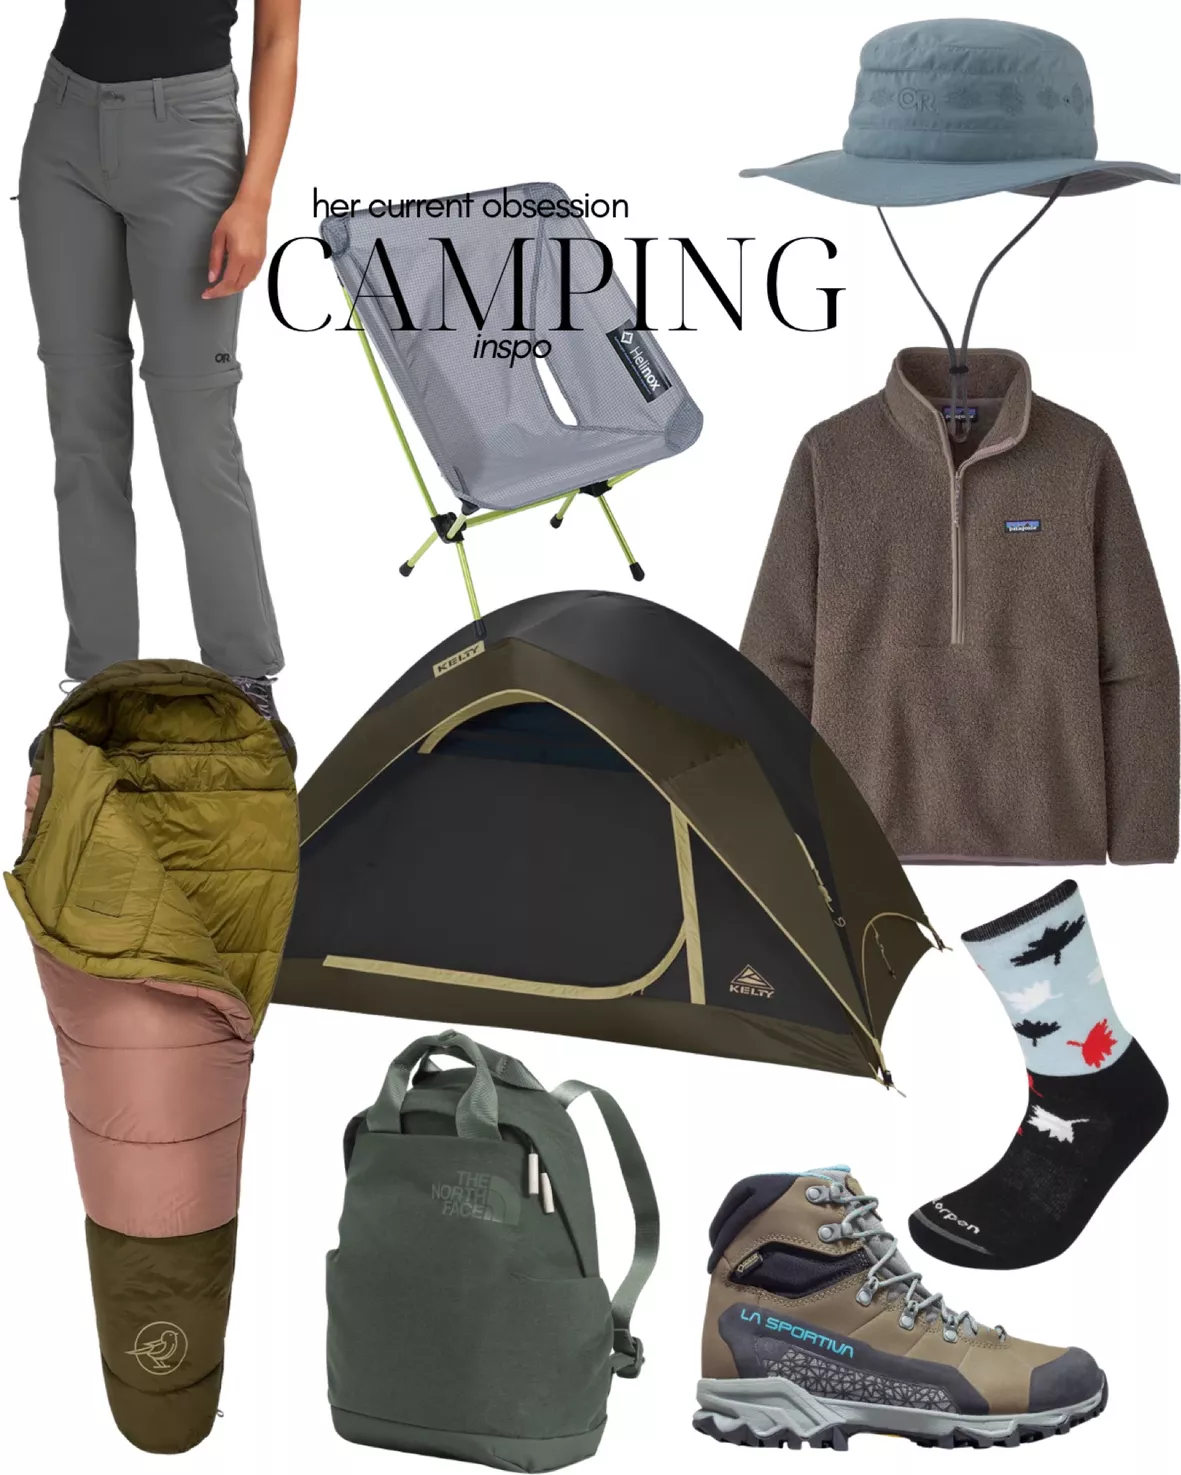 Camping outfits for women, Camping outfits, Trekking outfit